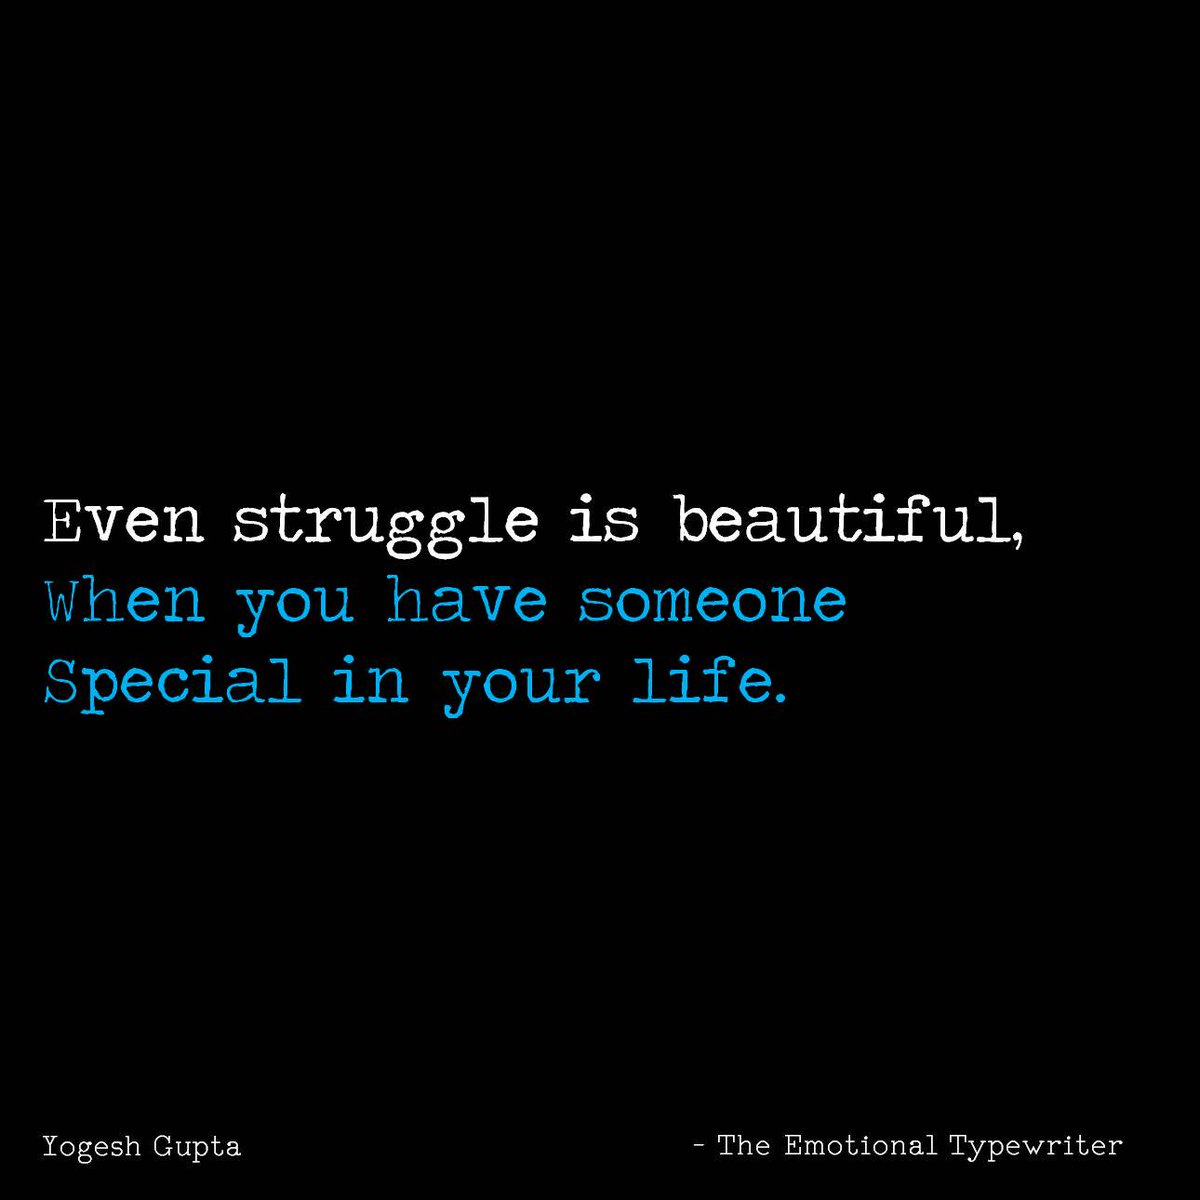 #struggle #in #life #with #someone #special #writing #writings #writersofindia #indianwriters #poetsofinstagram #Writeraofindia #tag #quotes #saying #instapoet #TheEmotionalTypewriter #Tet #TetSpecial